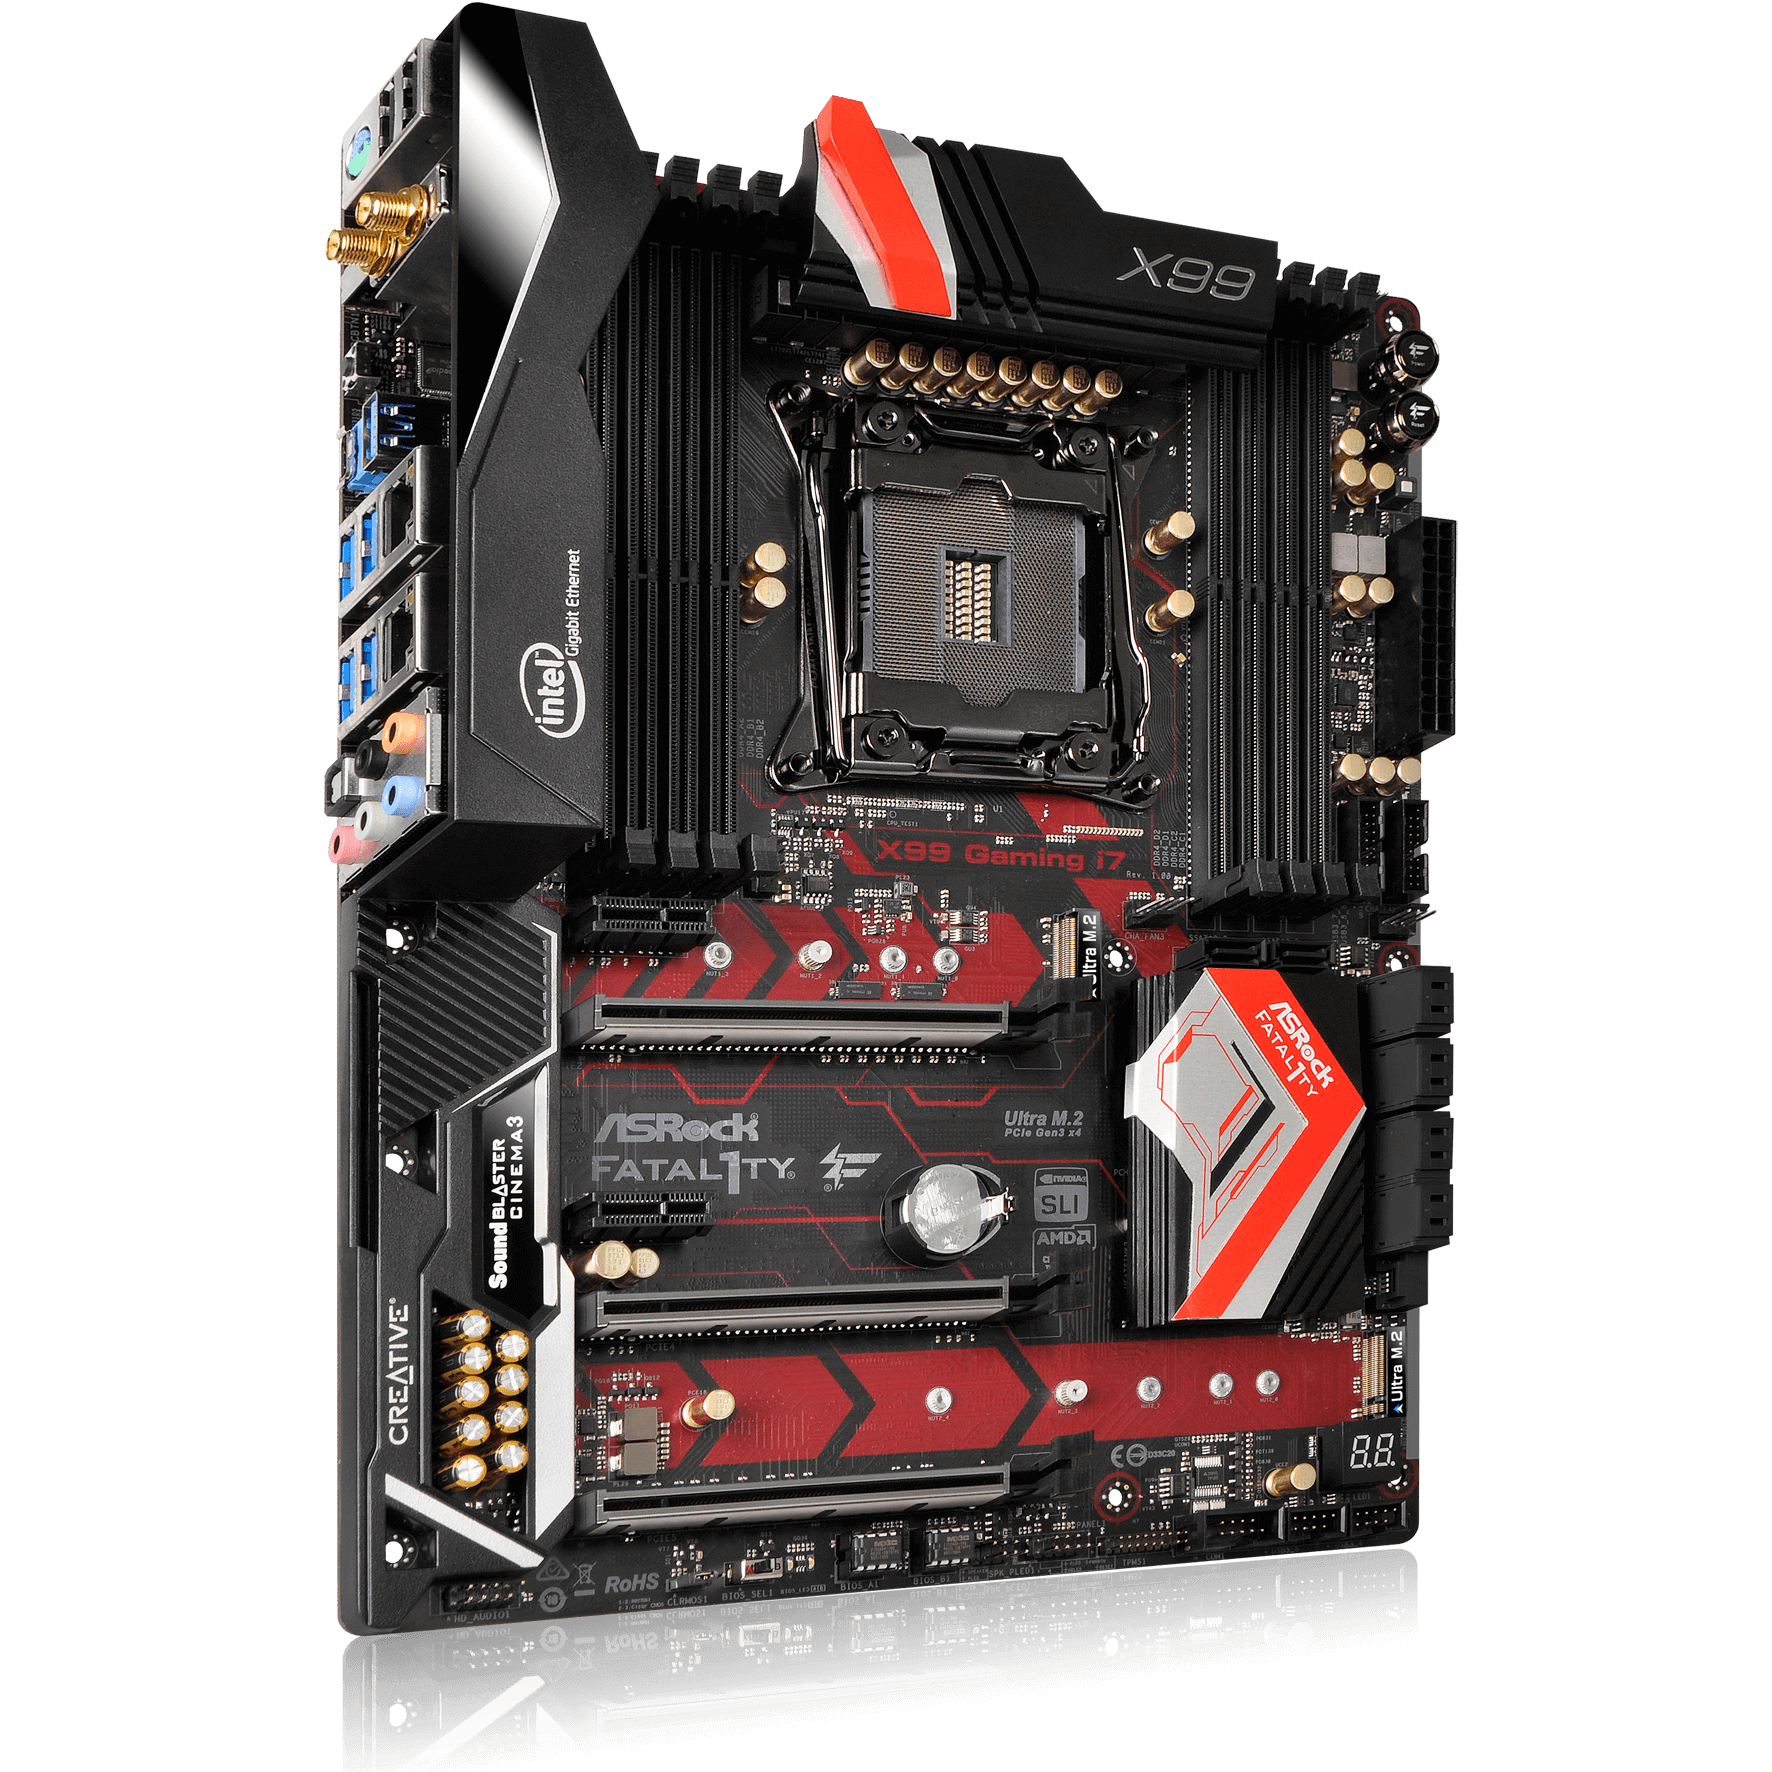 Pro game 1. ASROCK fatal1ty x99 professional Gaming. ASROCK x99 Taichi. ASROCK fatal1ty x99 professional Gaming i7. ASROCK professional fatal1ty.